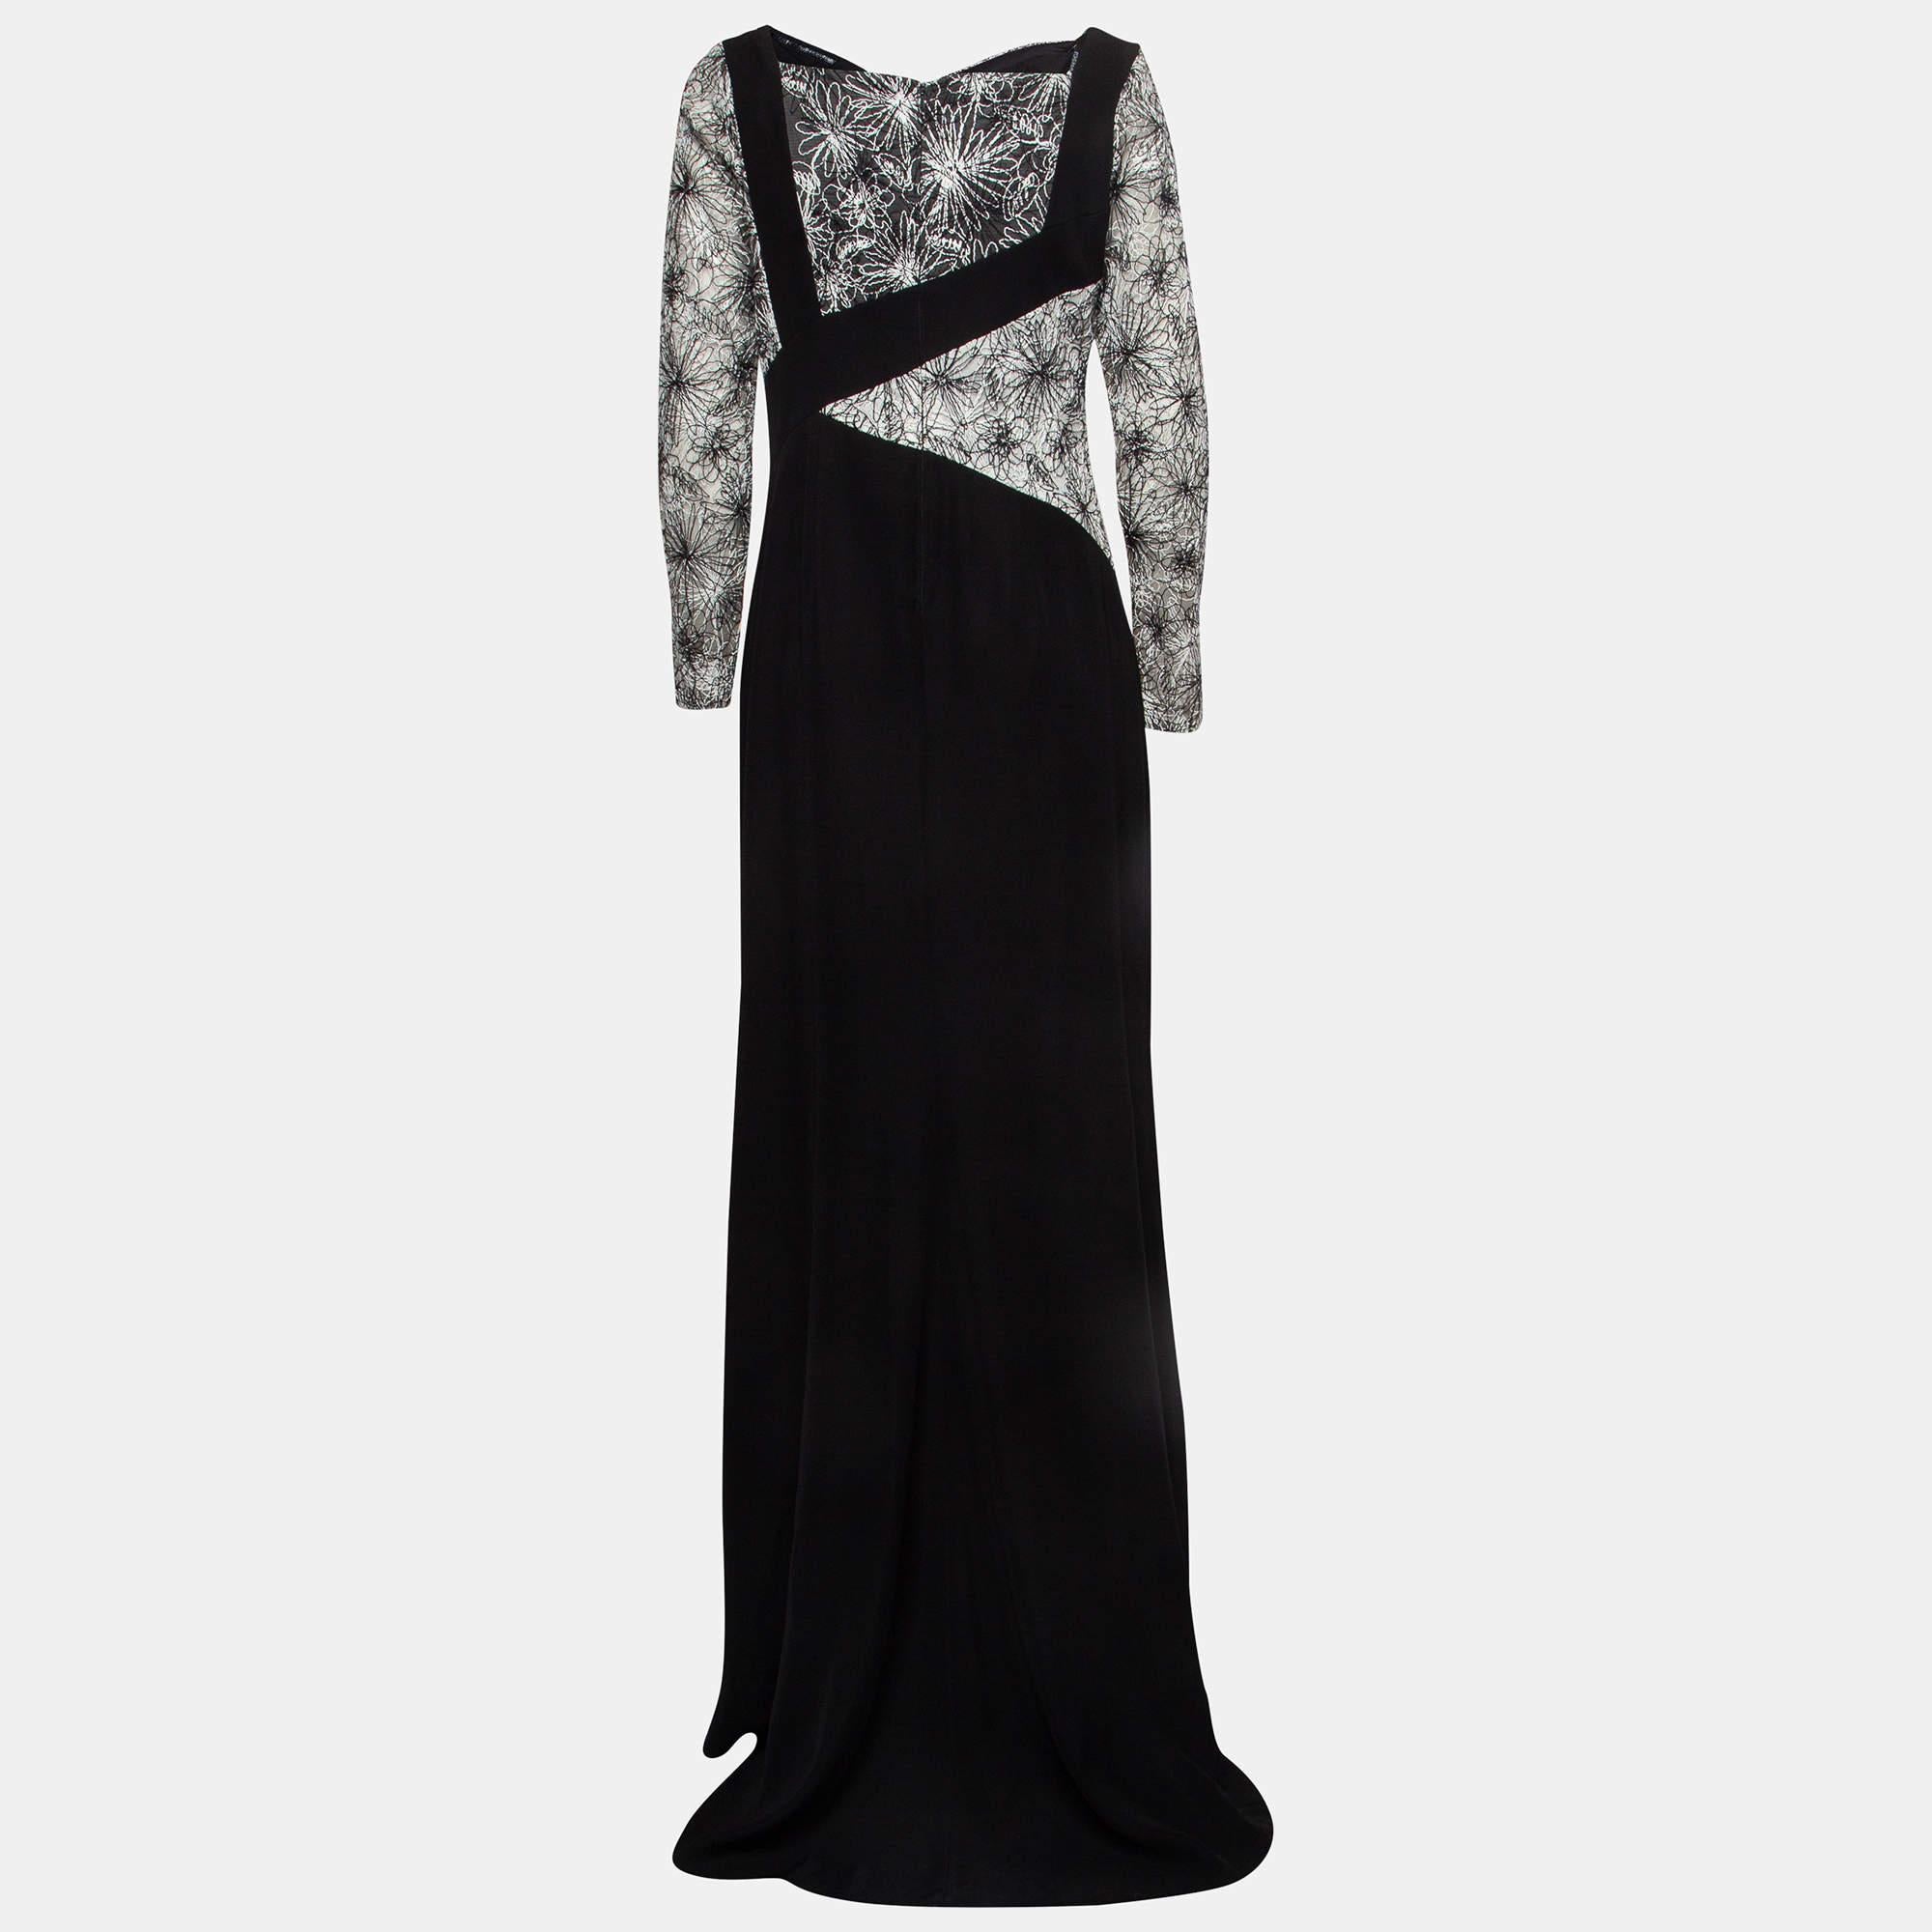 For all evening soirées and high-affair parties, a gown like this makes sure you look the best of all. Tailored into a superb fit and style, this gown is elevated with a stunning neckline and a beautiful hue. Bring home this lovely gown today.

